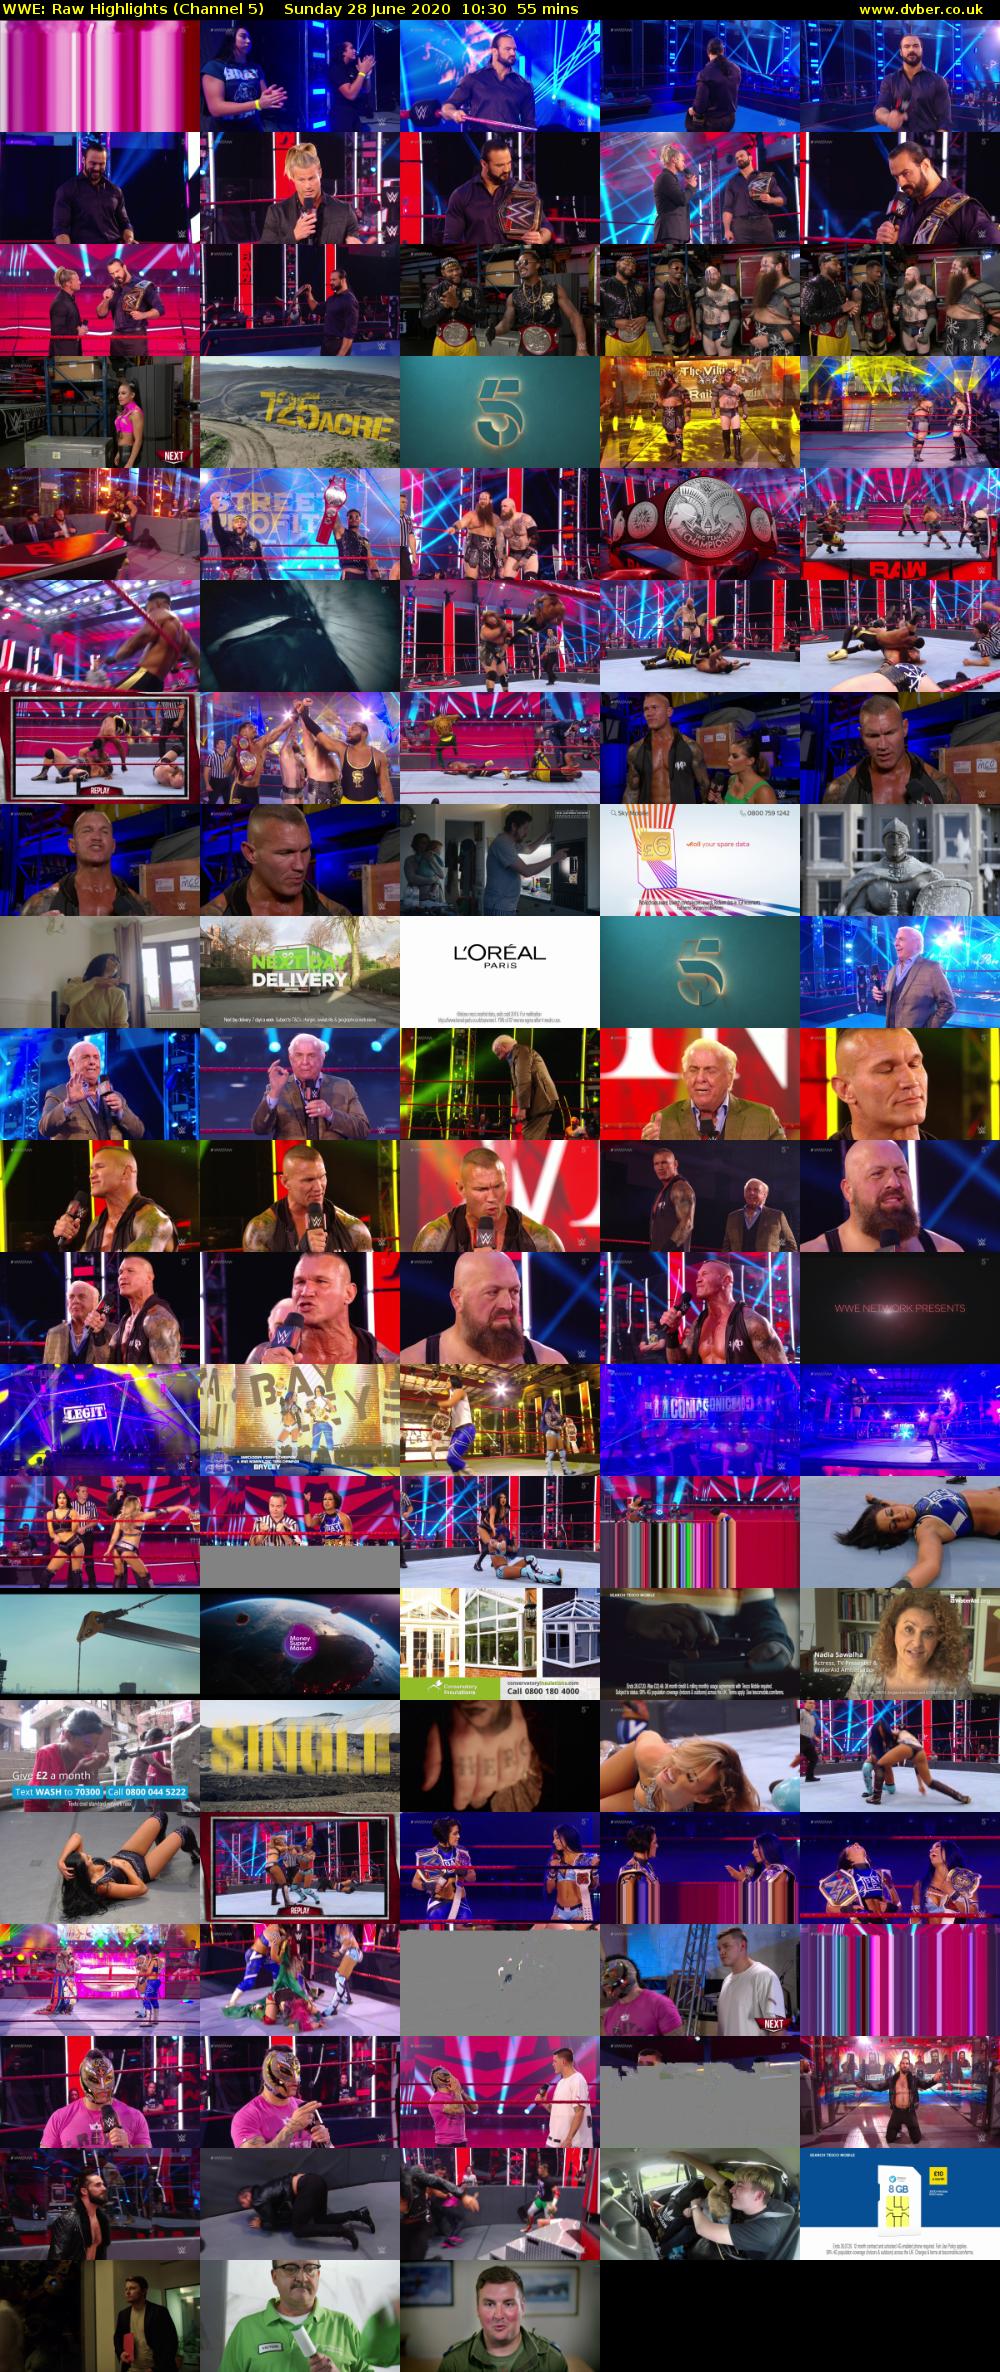 WWE: Raw Highlights (Channel 5) Sunday 28 June 2020 10:30 - 11:25